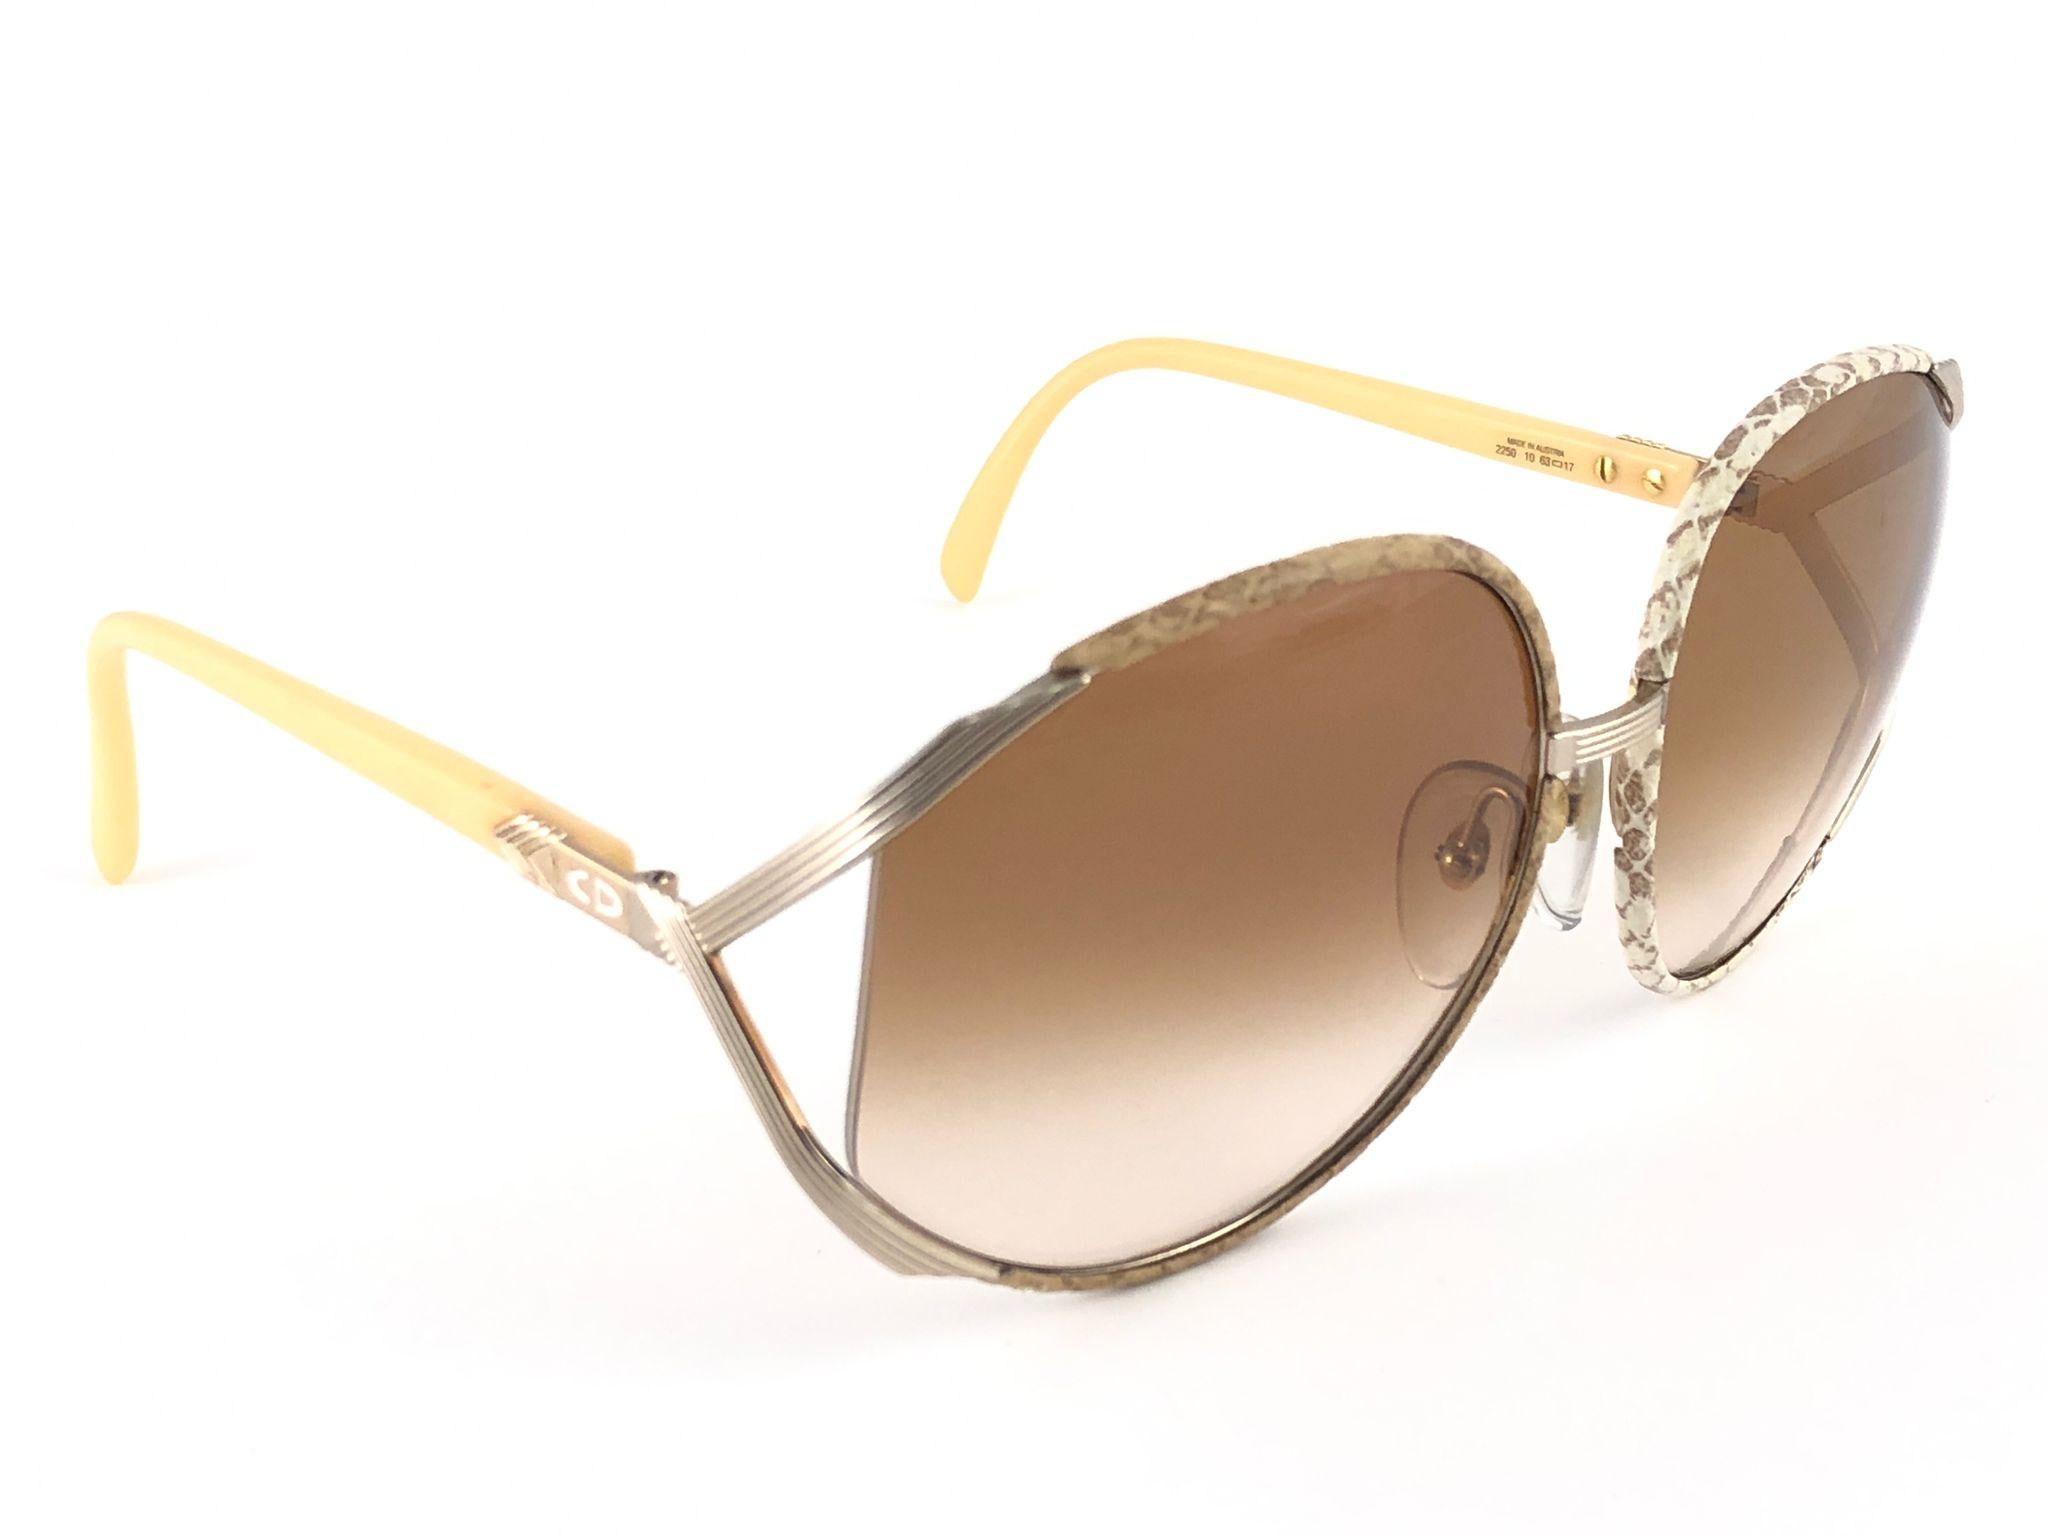 

Highly coveted Christian Dior oversized python combination frame.
Spotless light gradient lenses. A collector’s piece!

Come with its original Christian Dior lunettes sleeve.

New, never worn or displayed. Made in austria.

